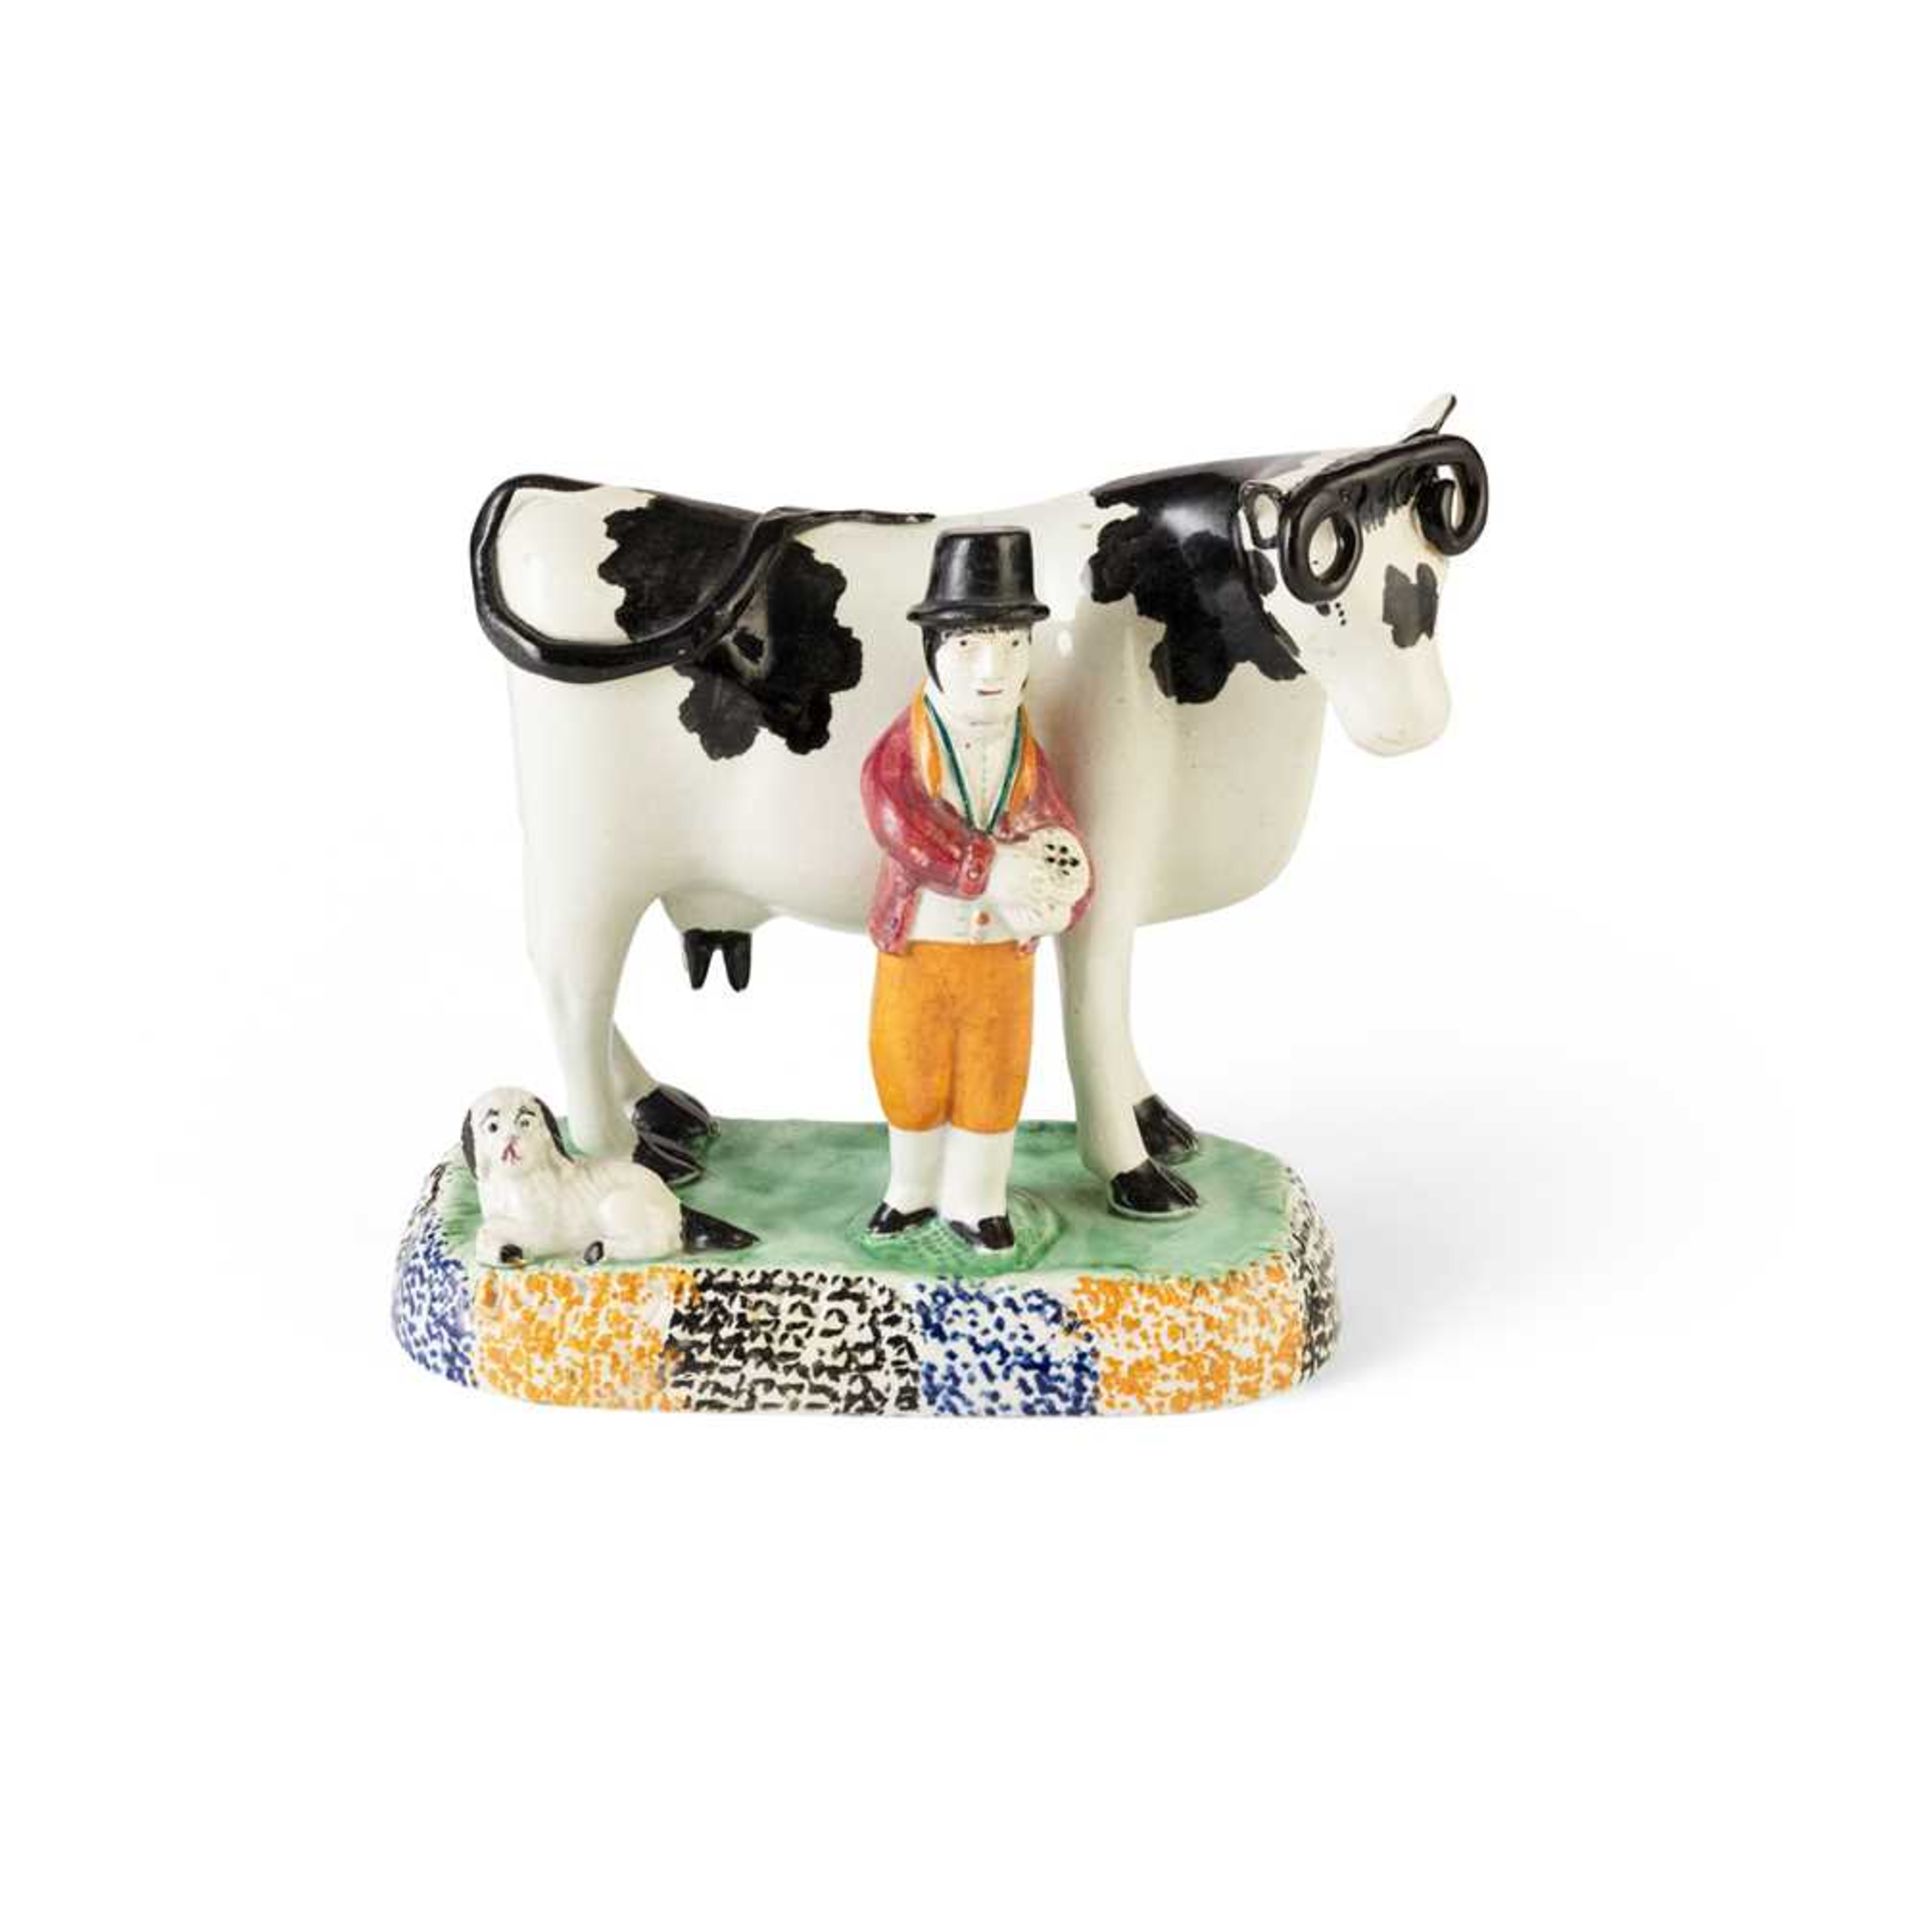 YORKSHIRE POTTERY PRATTWARE COW FIGURE GROUP EARLY 19TH CENTURY